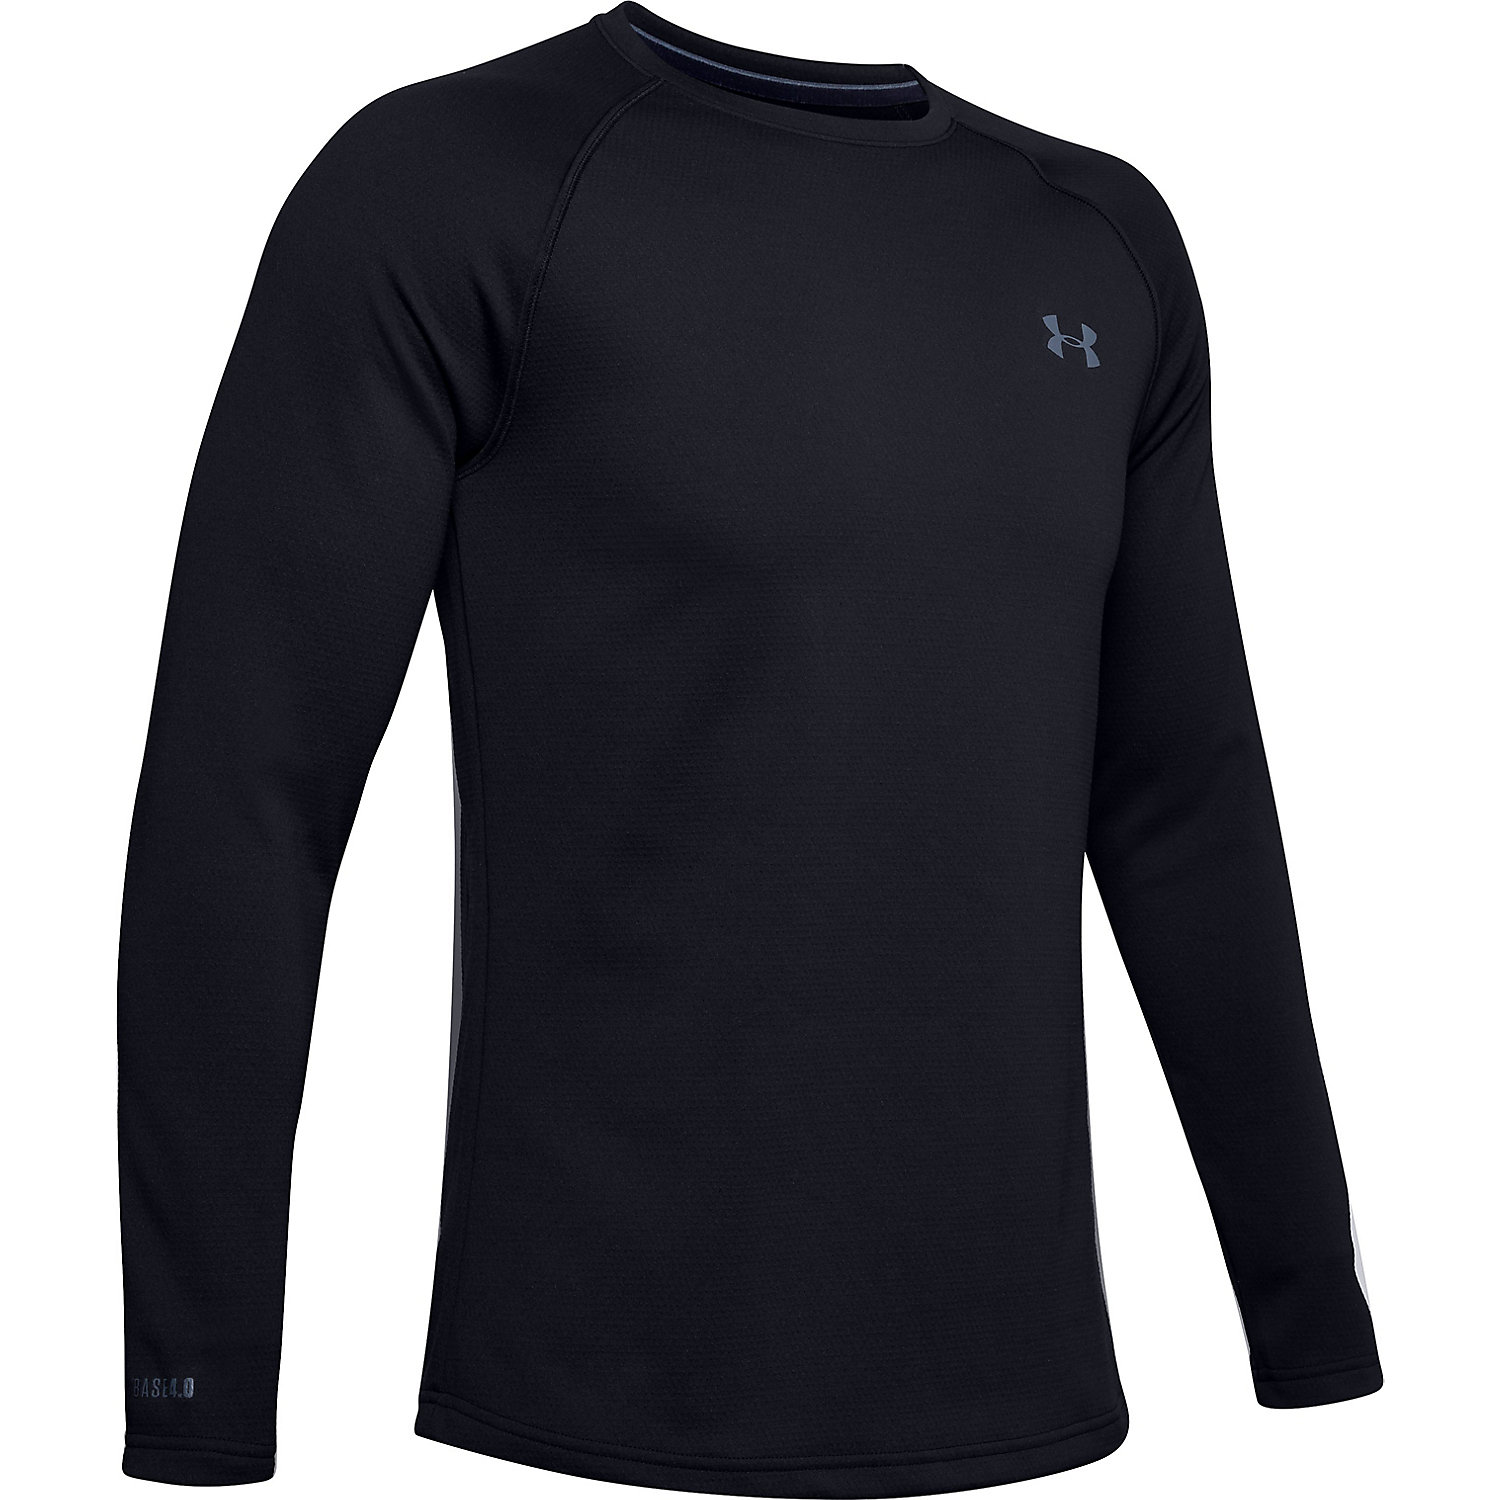 Under Armour Mens Packaged Base 4.0 Crew Neck Top